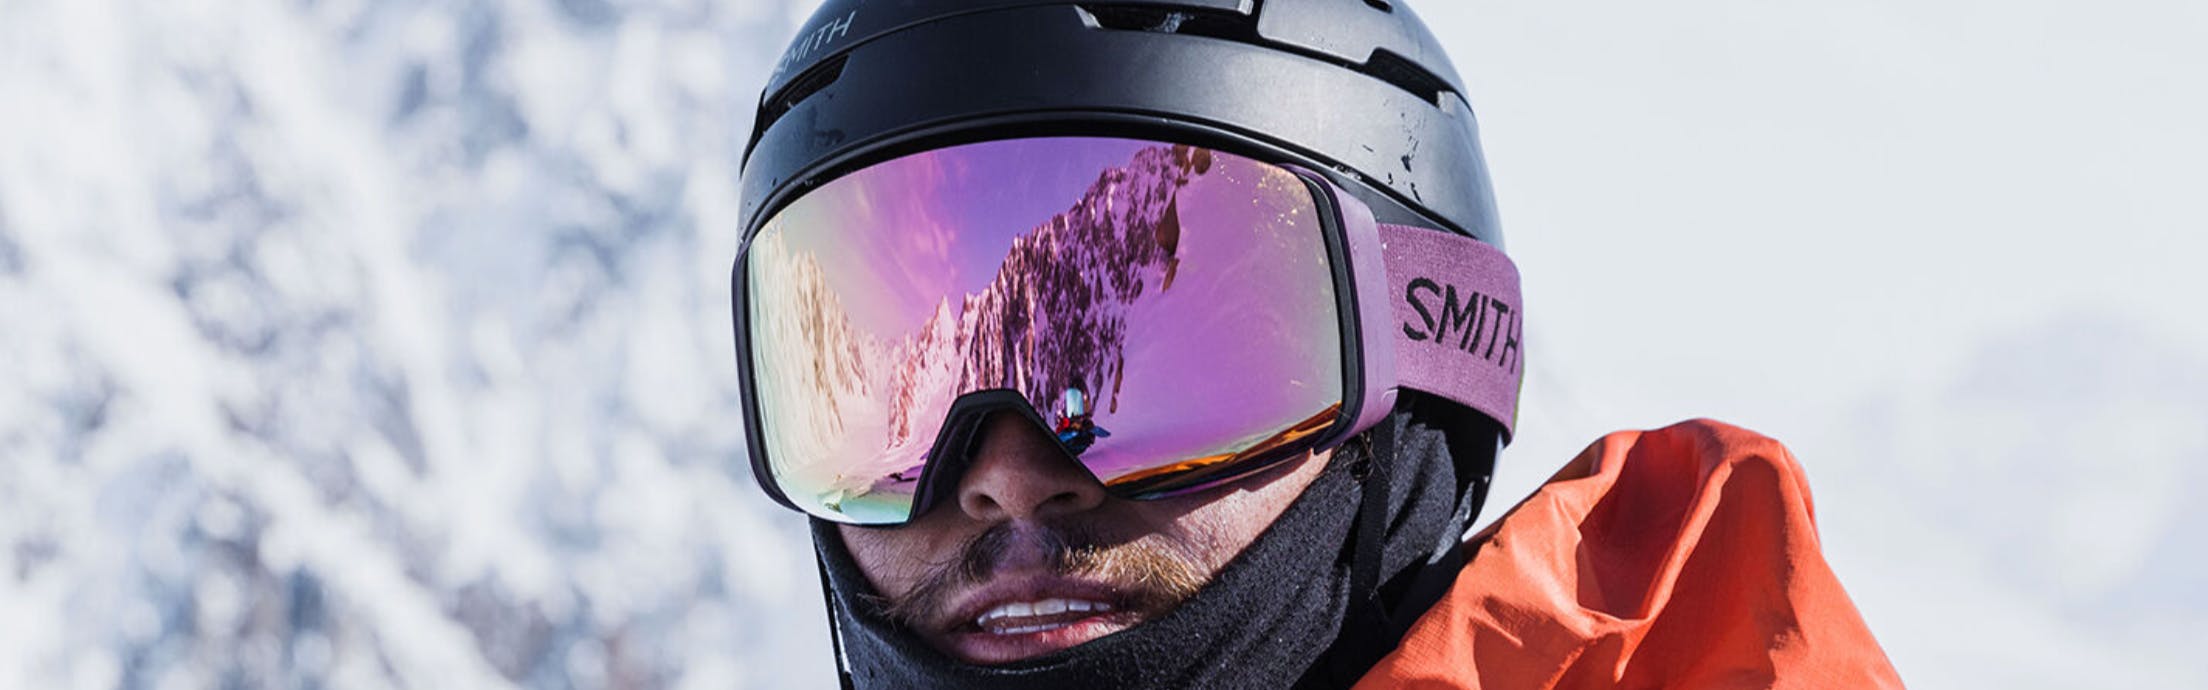 An Expert Guide to Smith Goggles | Curated.com